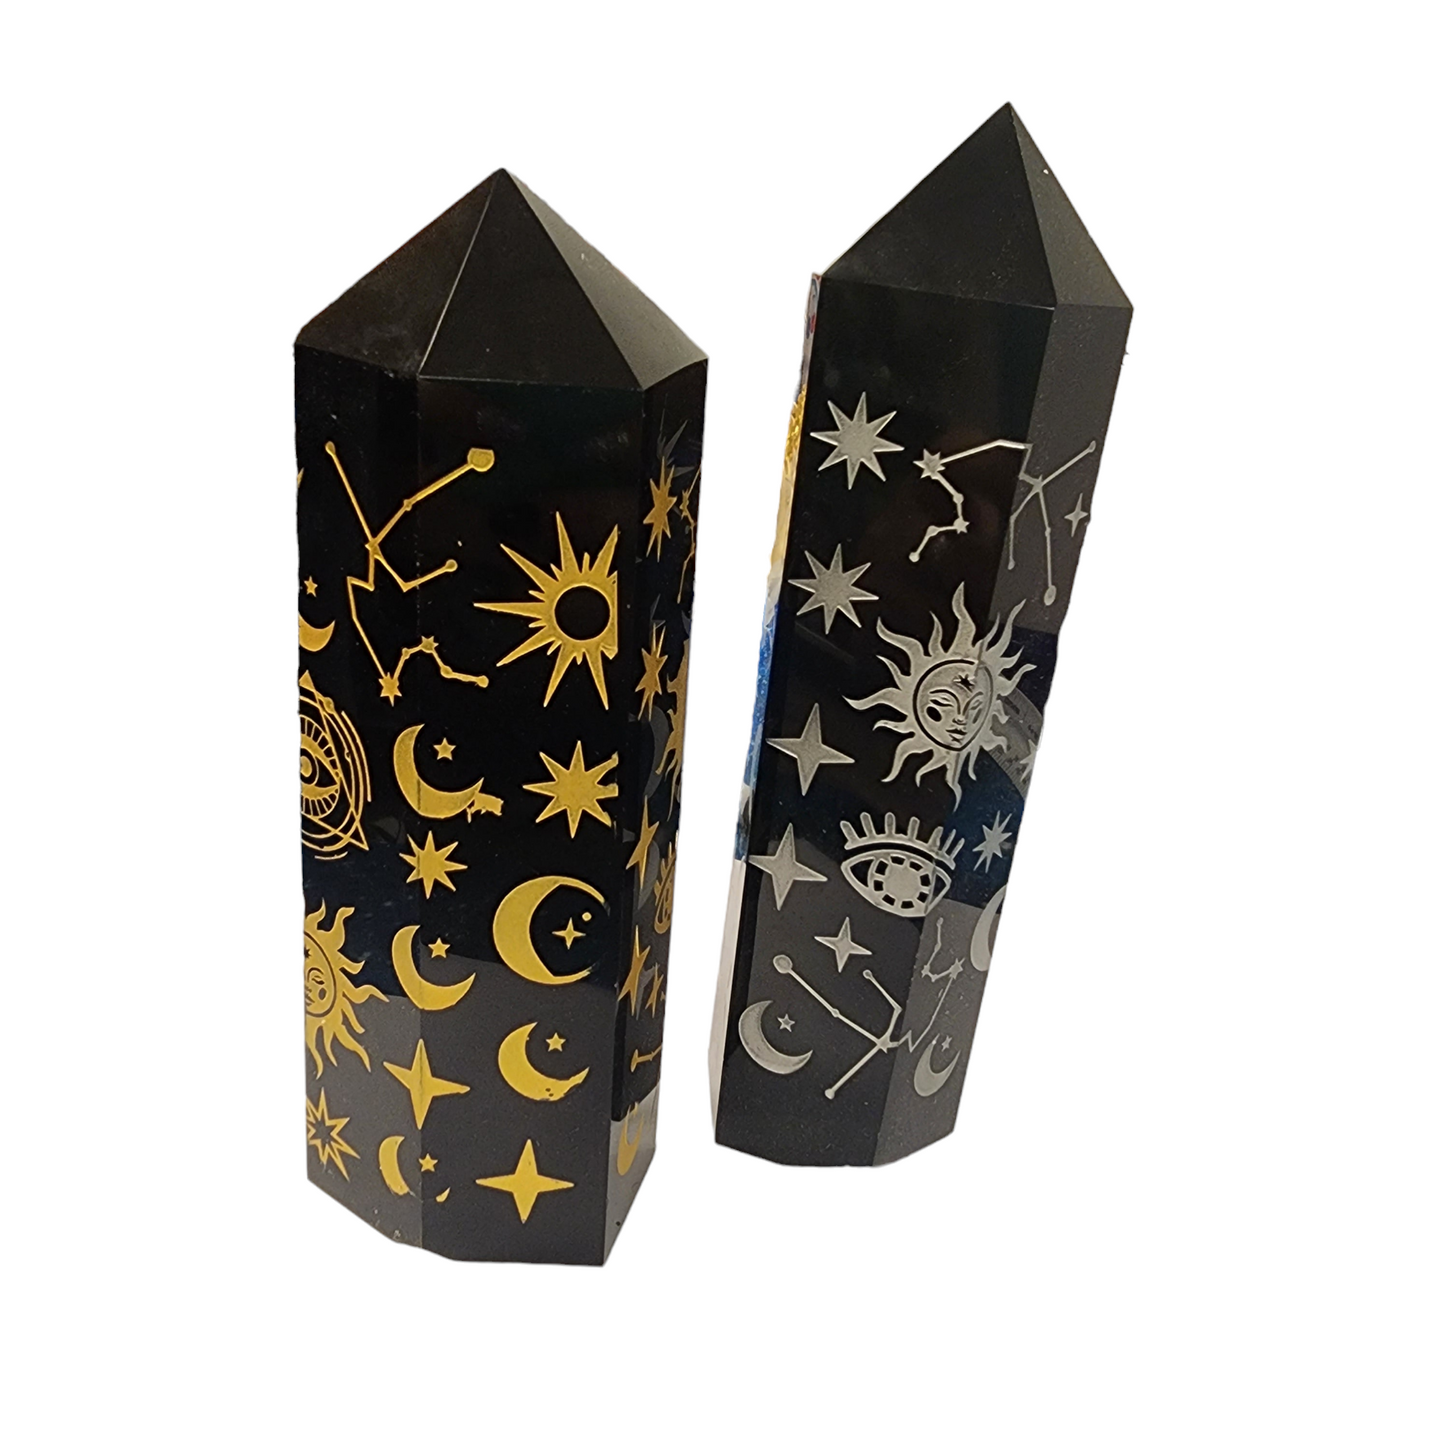 Obsidian Celestial Astrology Patterned Towers